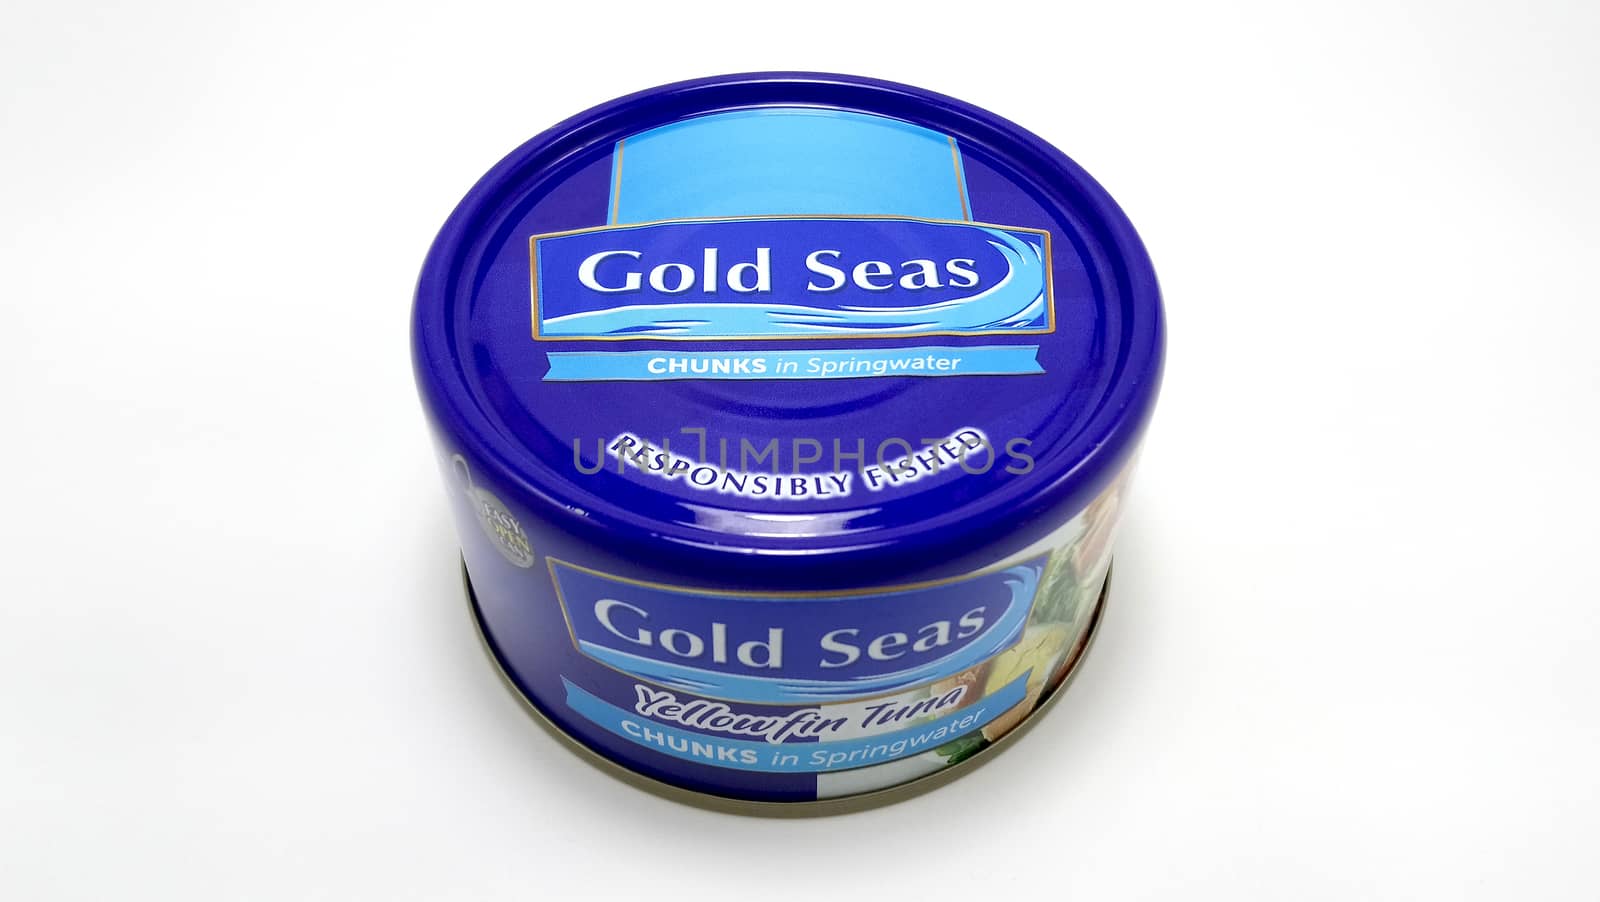 Gold seas tuna chunks in spring water can in Manila, Philippines by imwaltersy